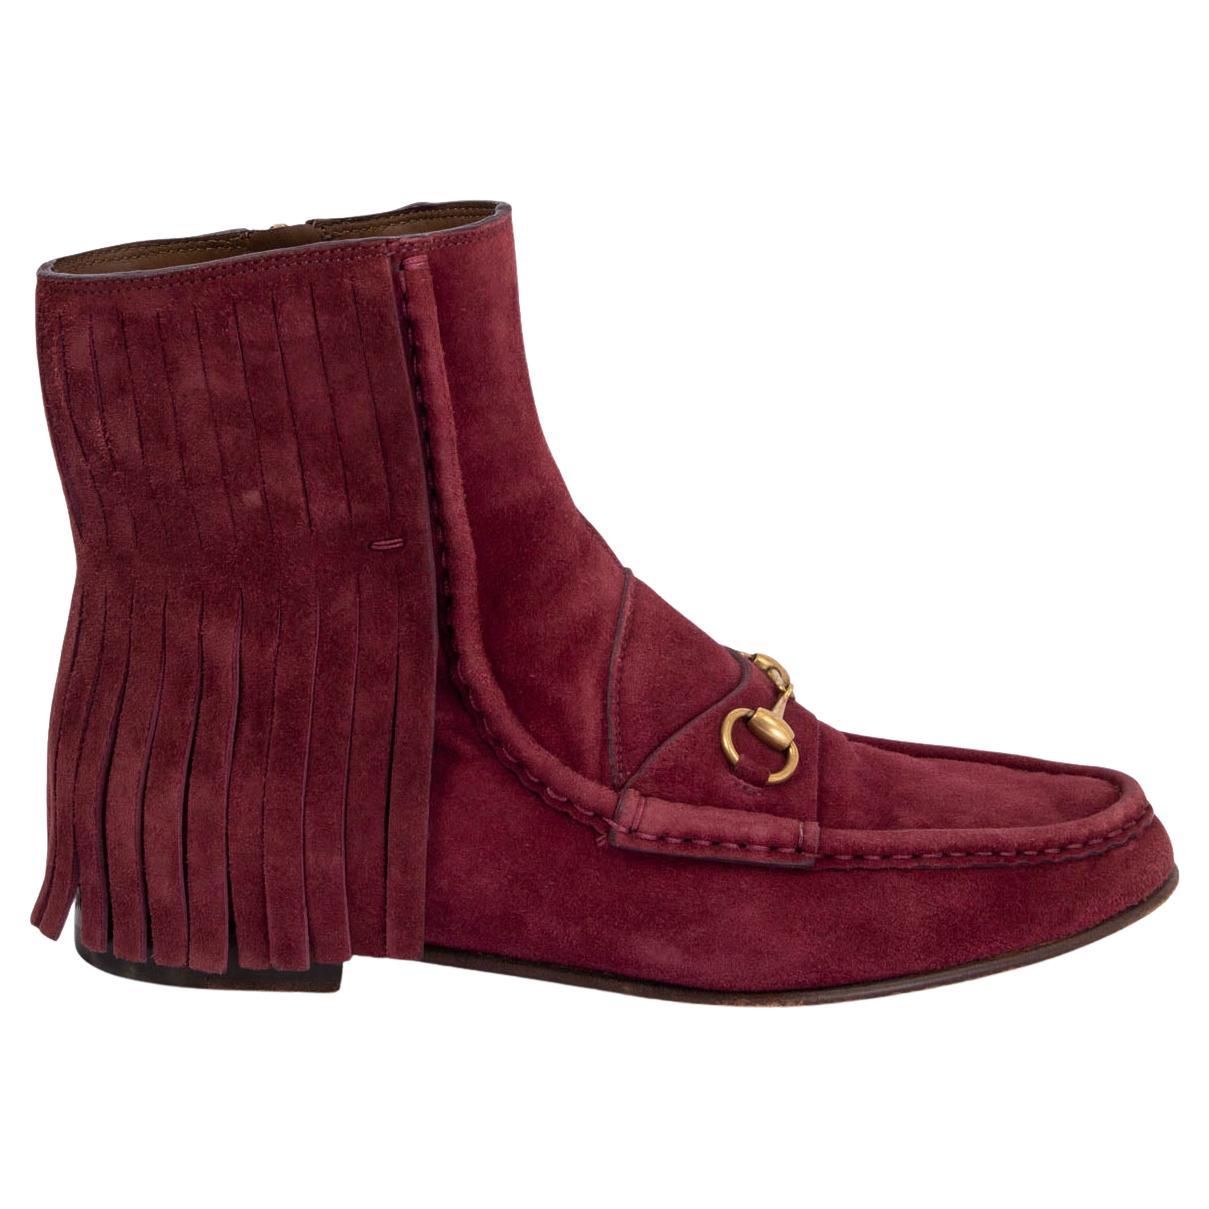 GUCCI burgundy suede 2014 FRINGED HORSEBIT LOAFER Boots Shoes 37.5 For Sale